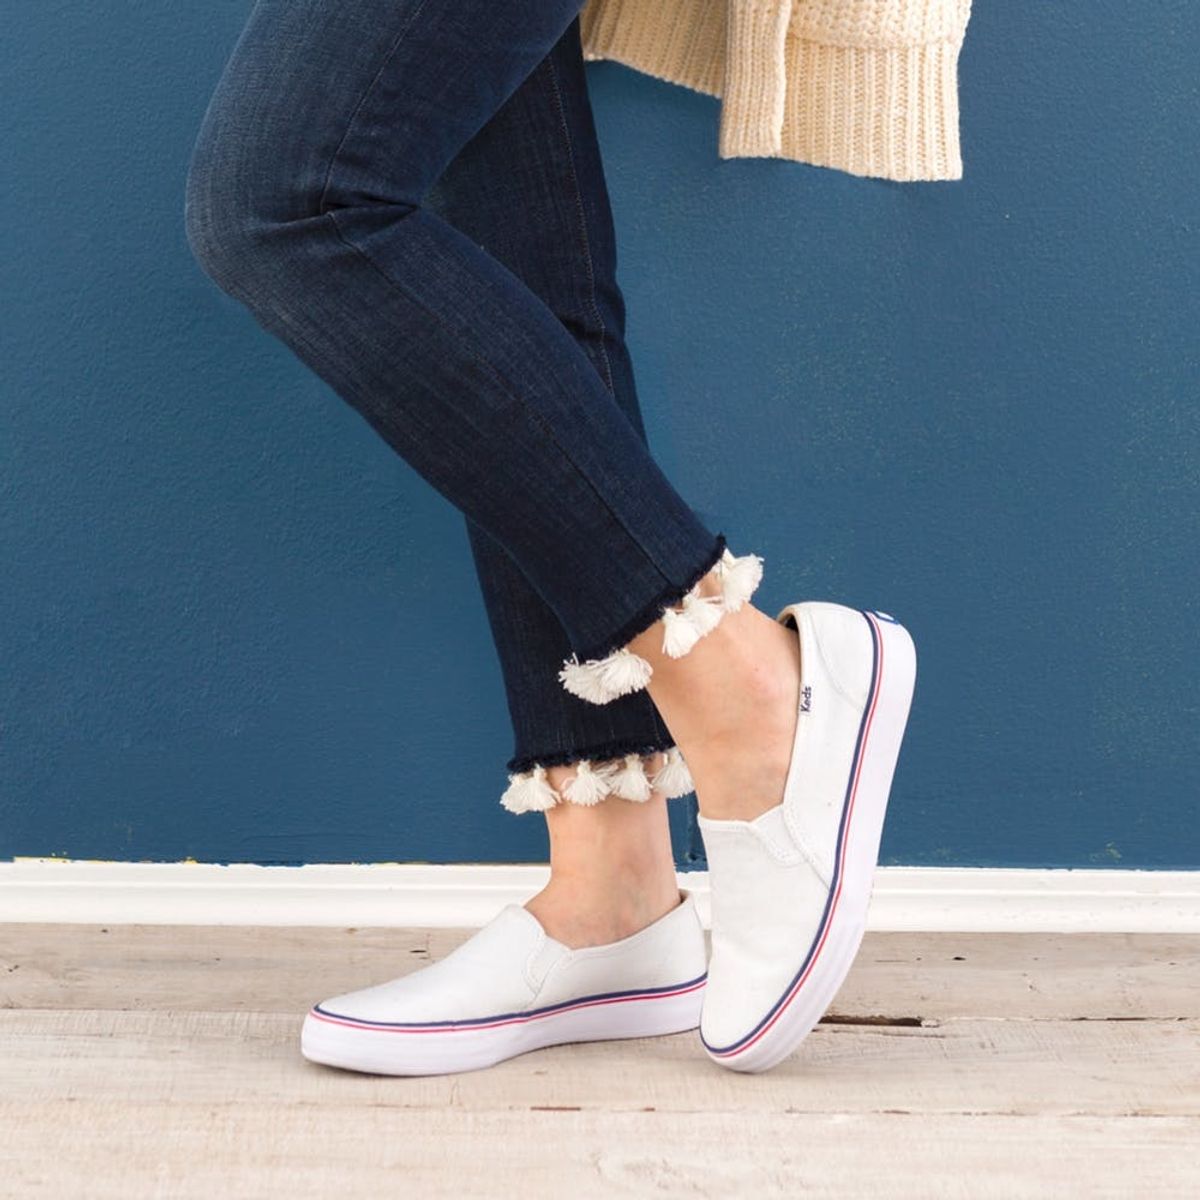 Petite-Girl Problems Solved With These Easy Denim Hem Hacks